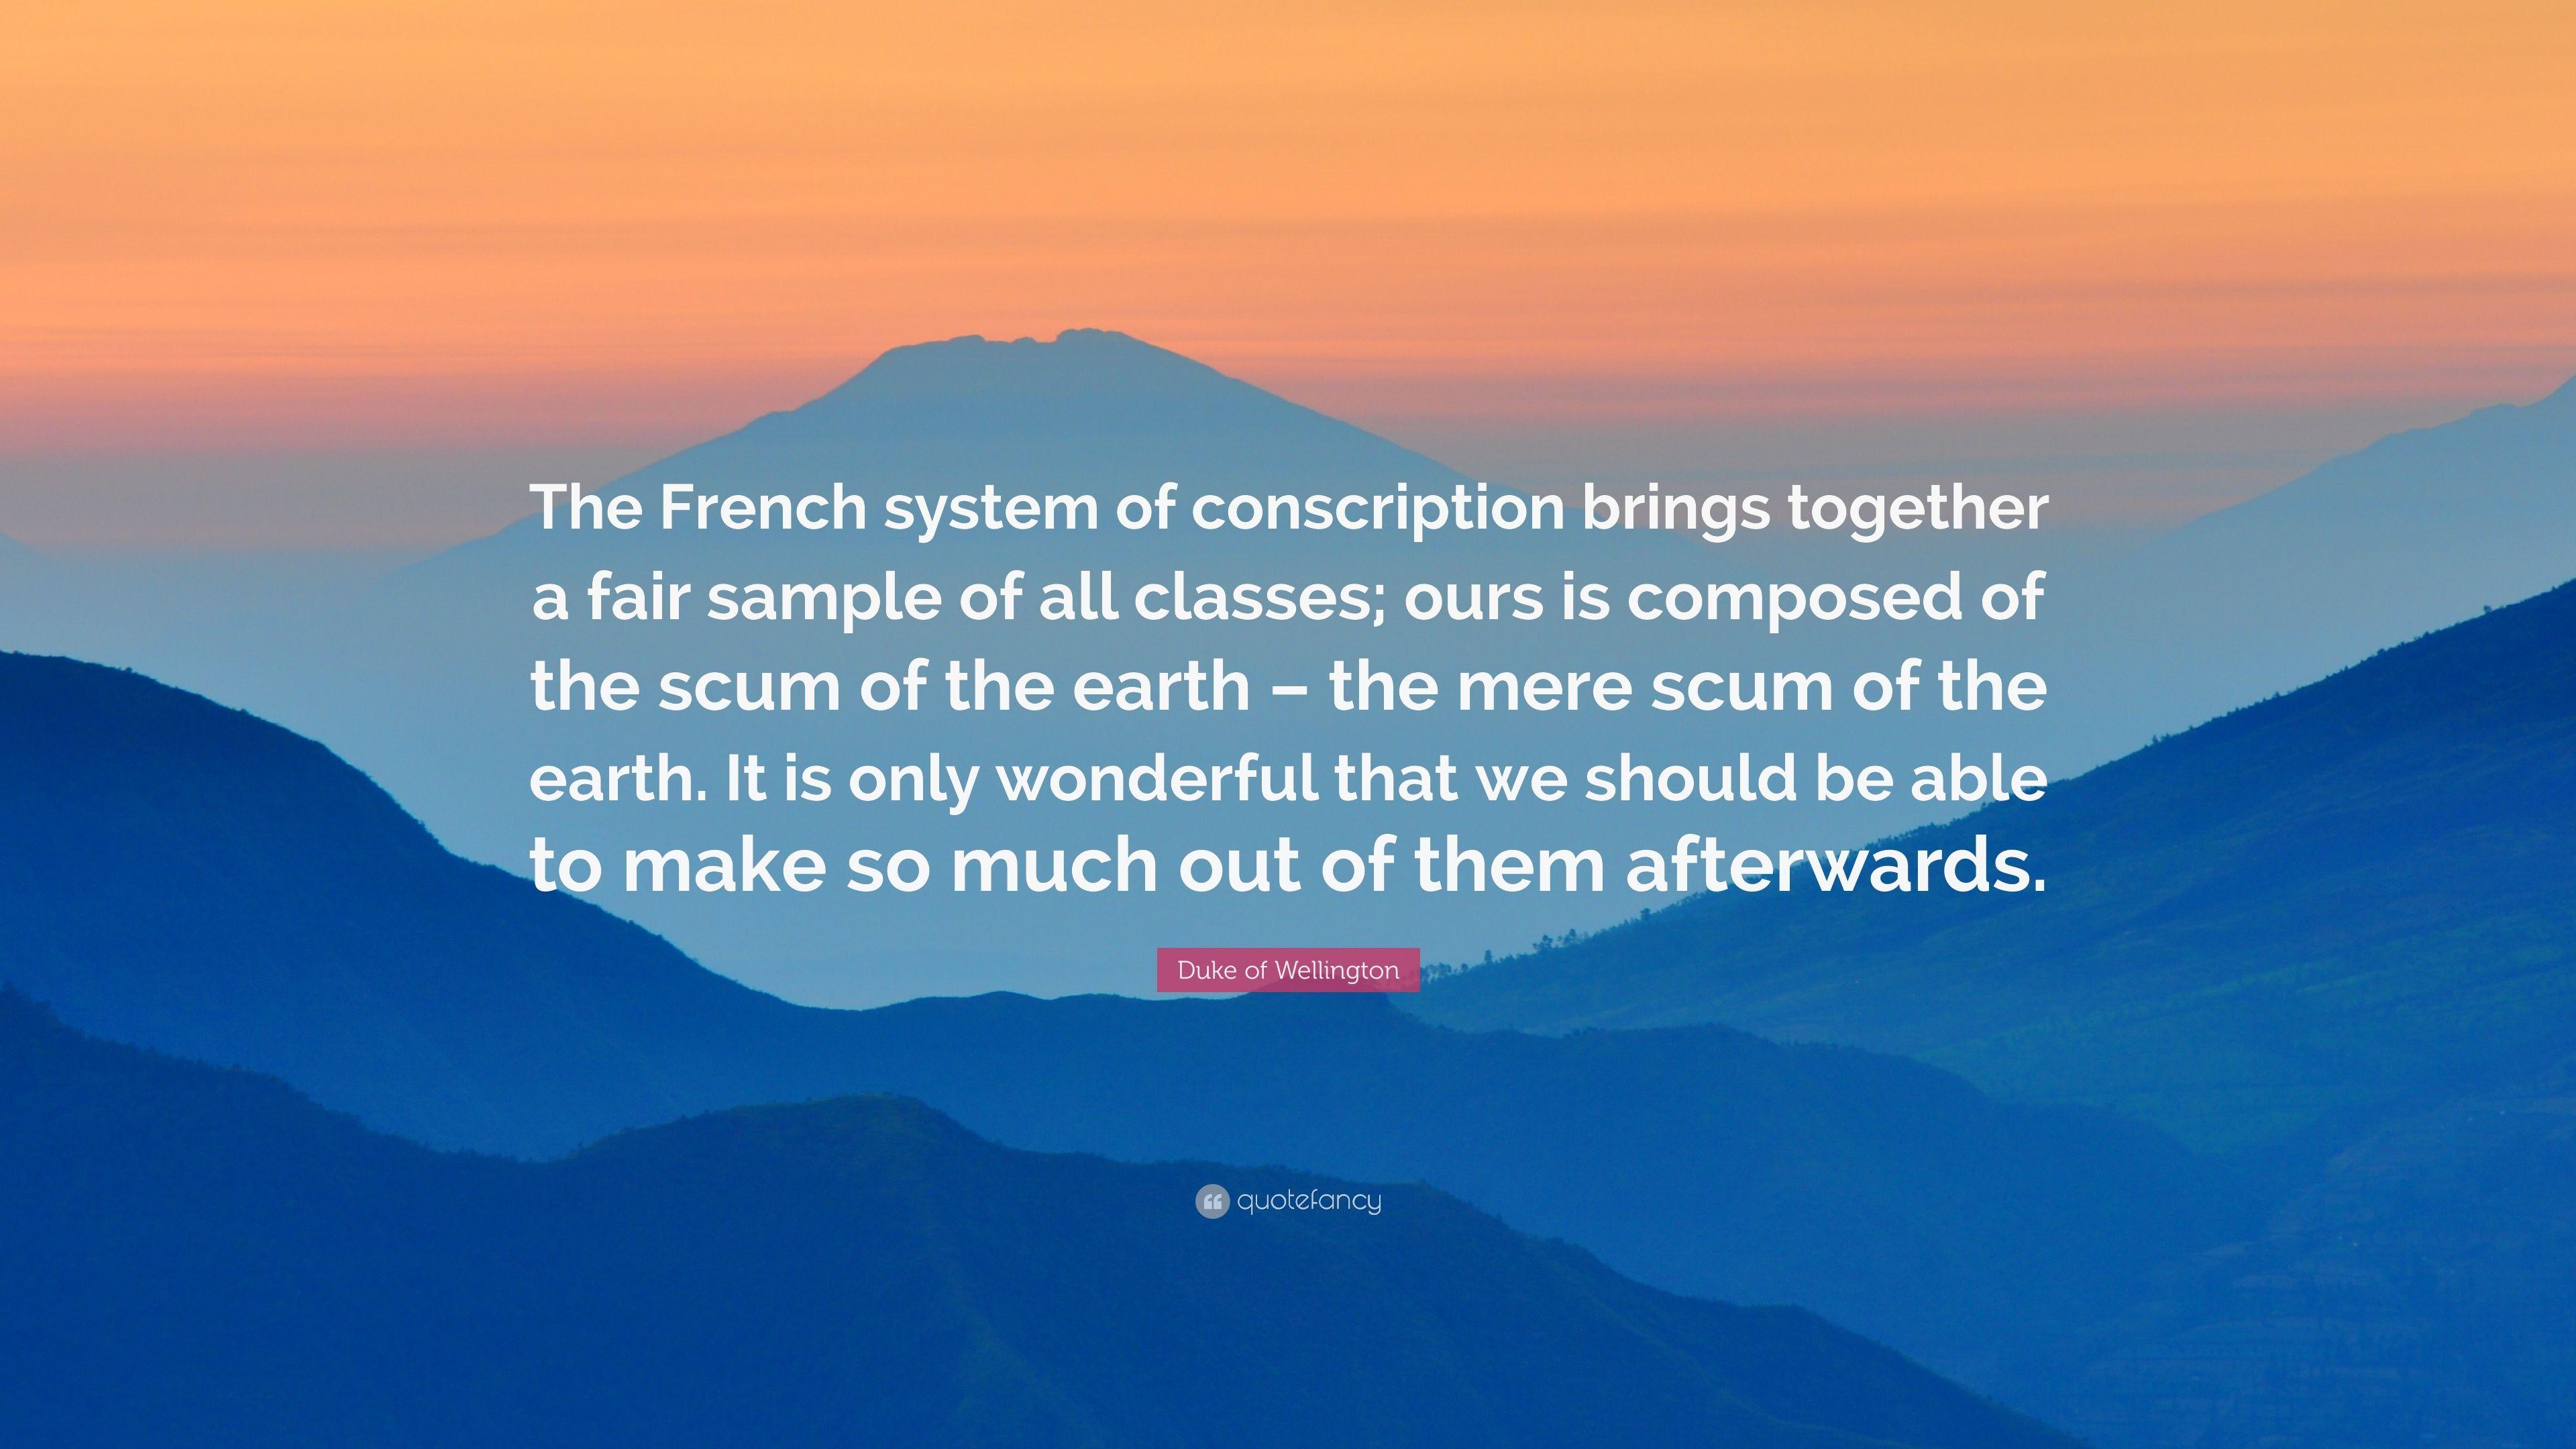 Duke of Wellington Quote: “The French system of conscription brings